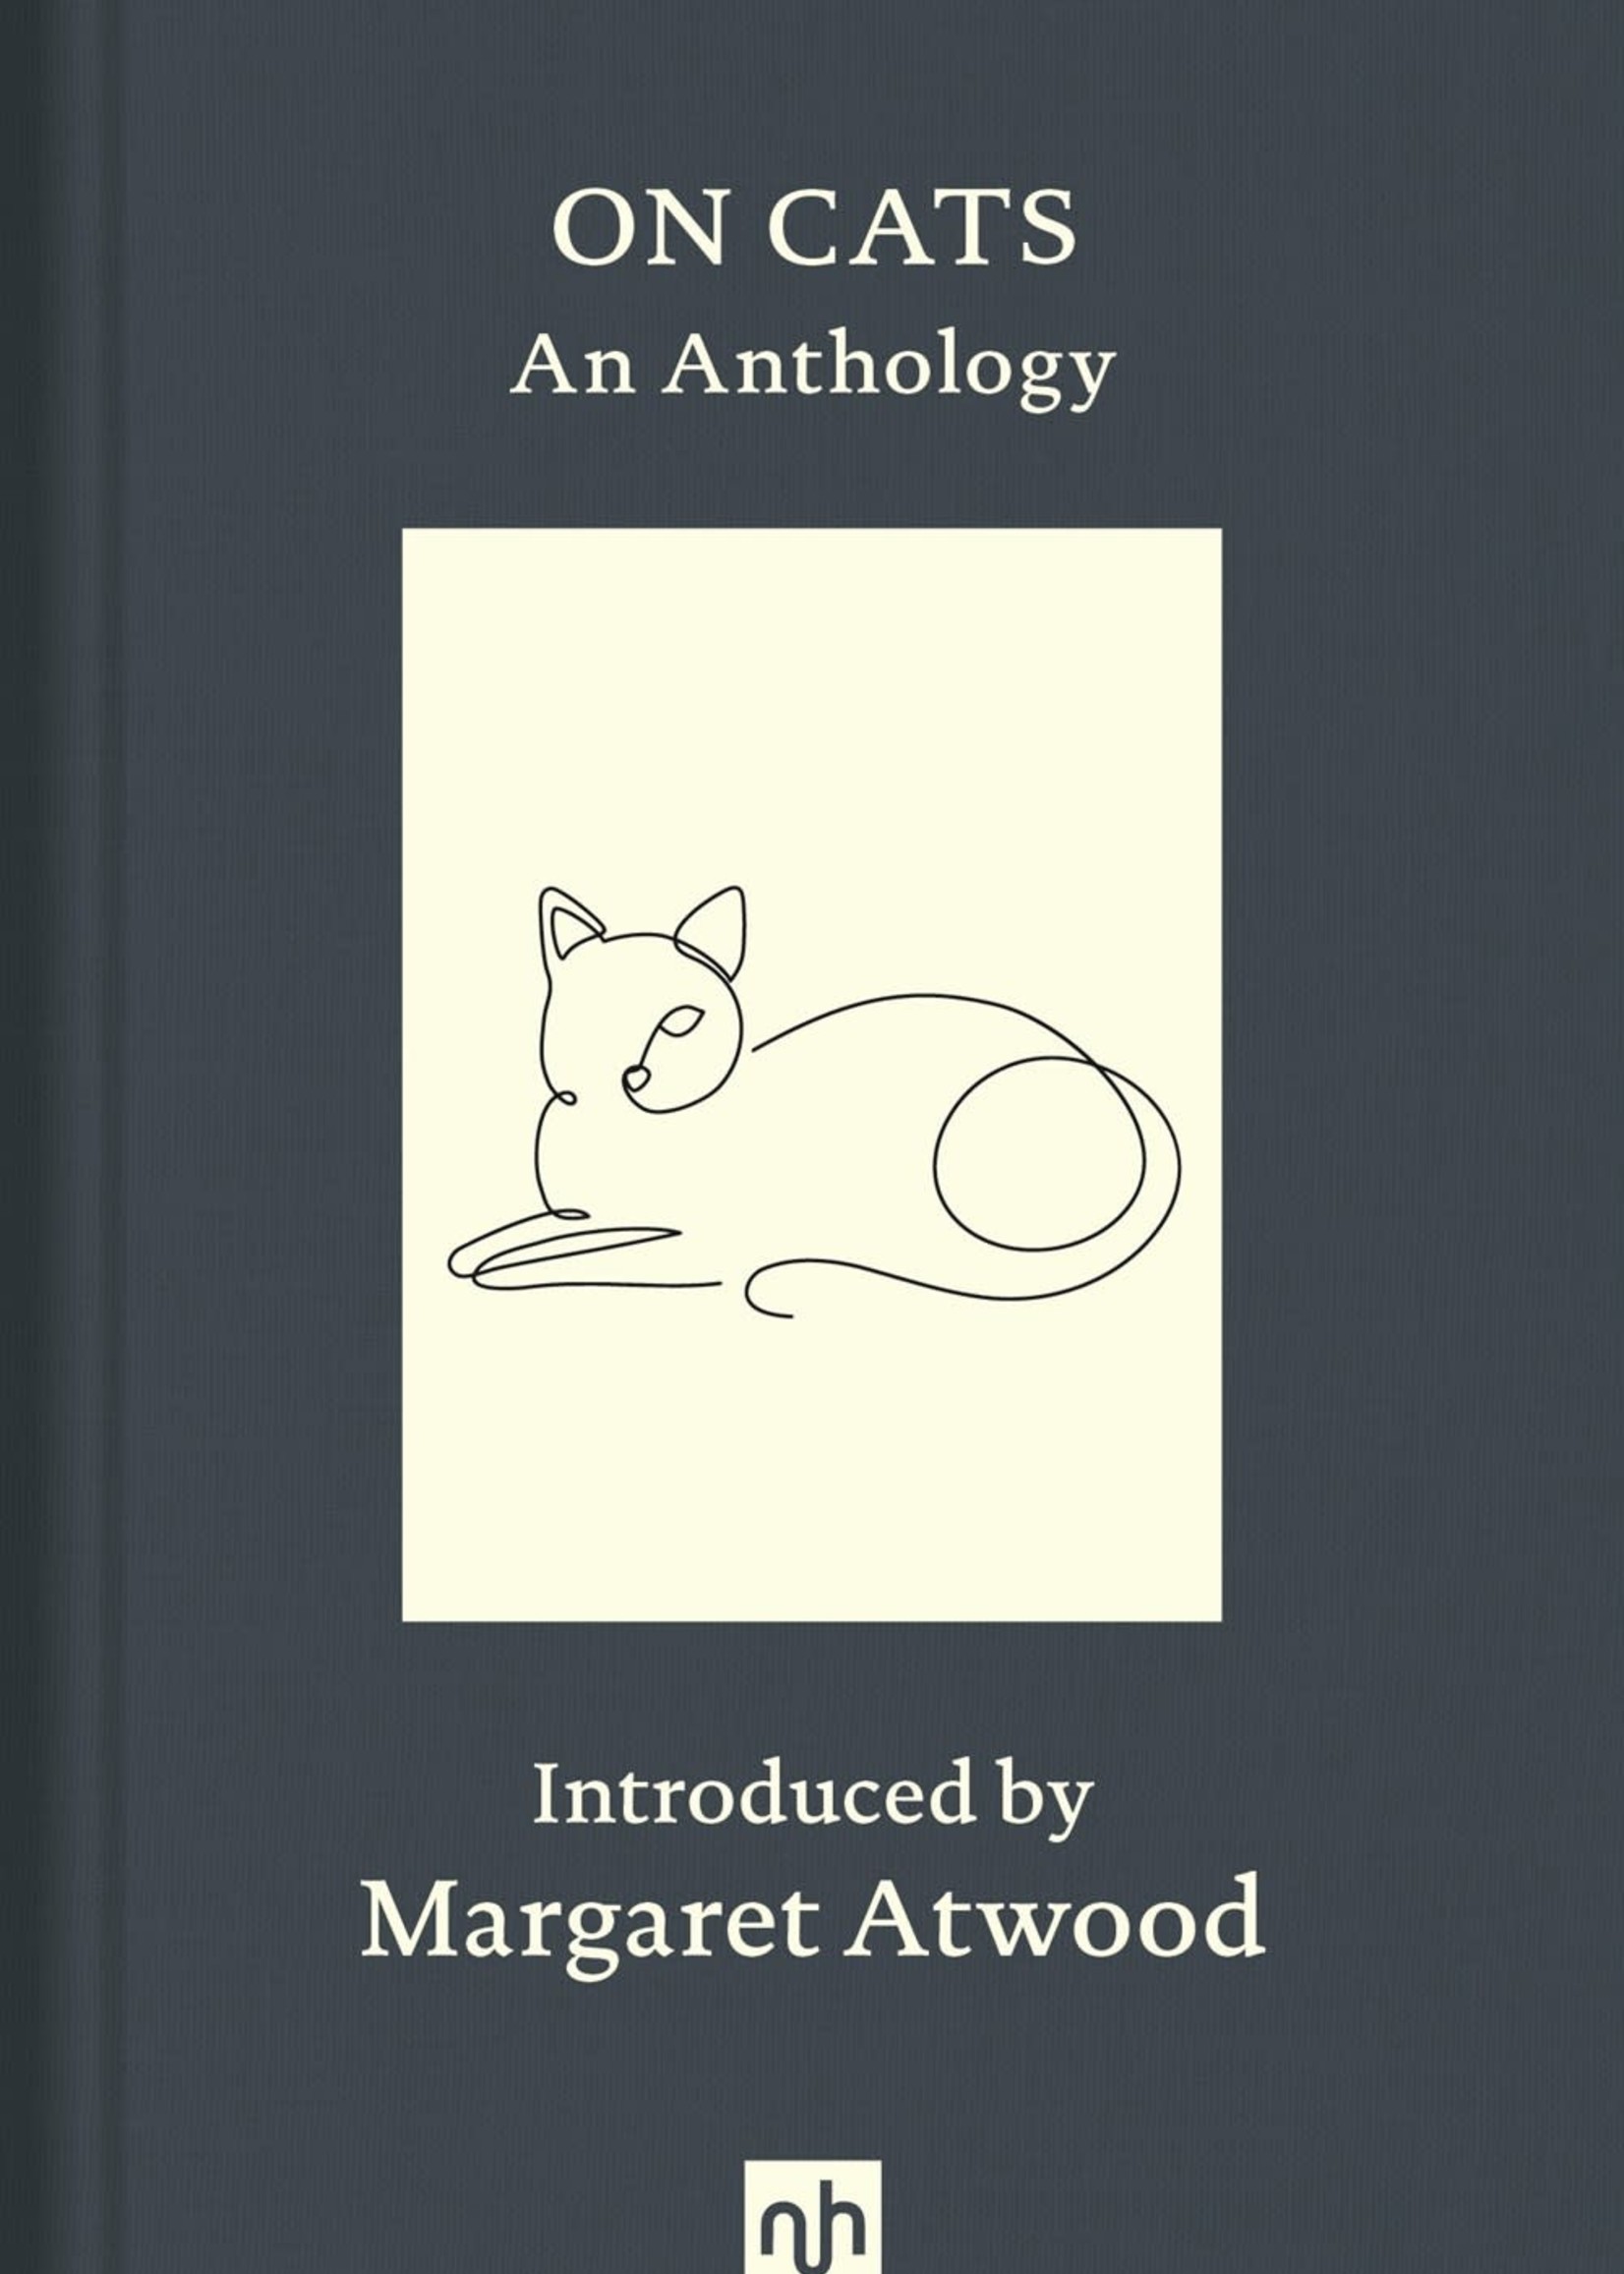 On Cats: An Anthology by Margaret Atwood